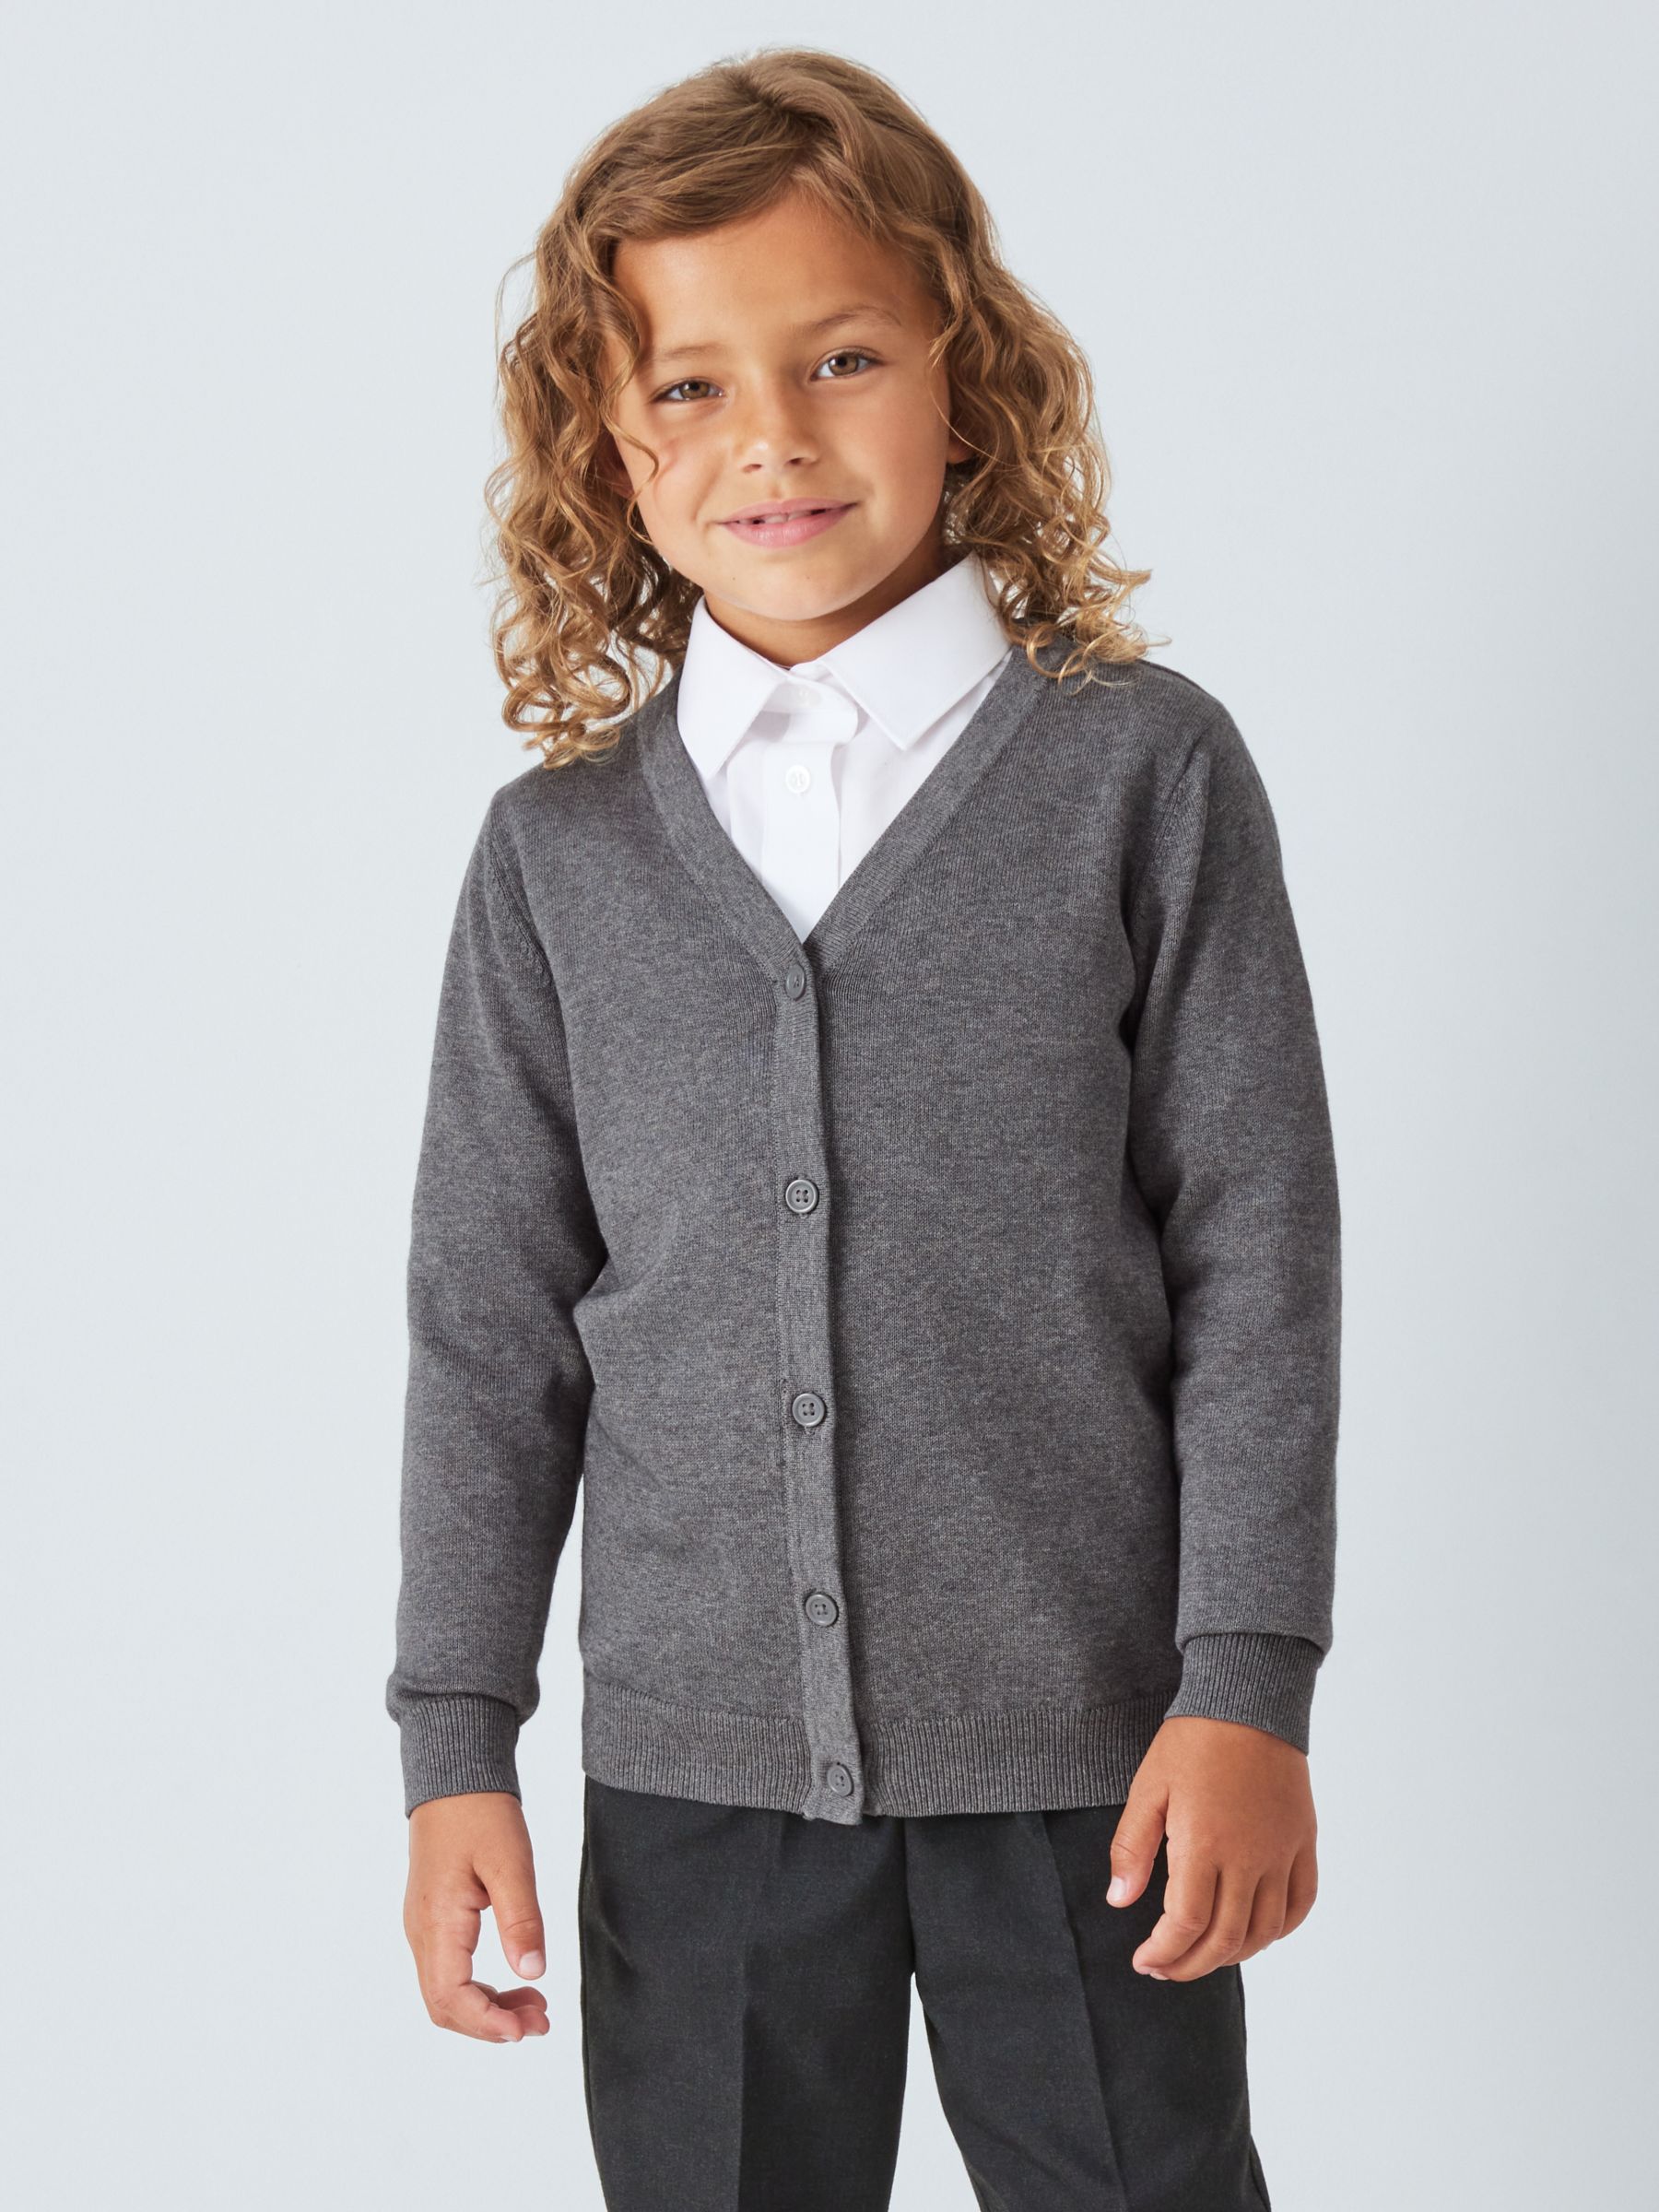 John Lewis ANYDAY Unisex Cotton School Cardigan, Pack of 2, Grey Charcoal, 38